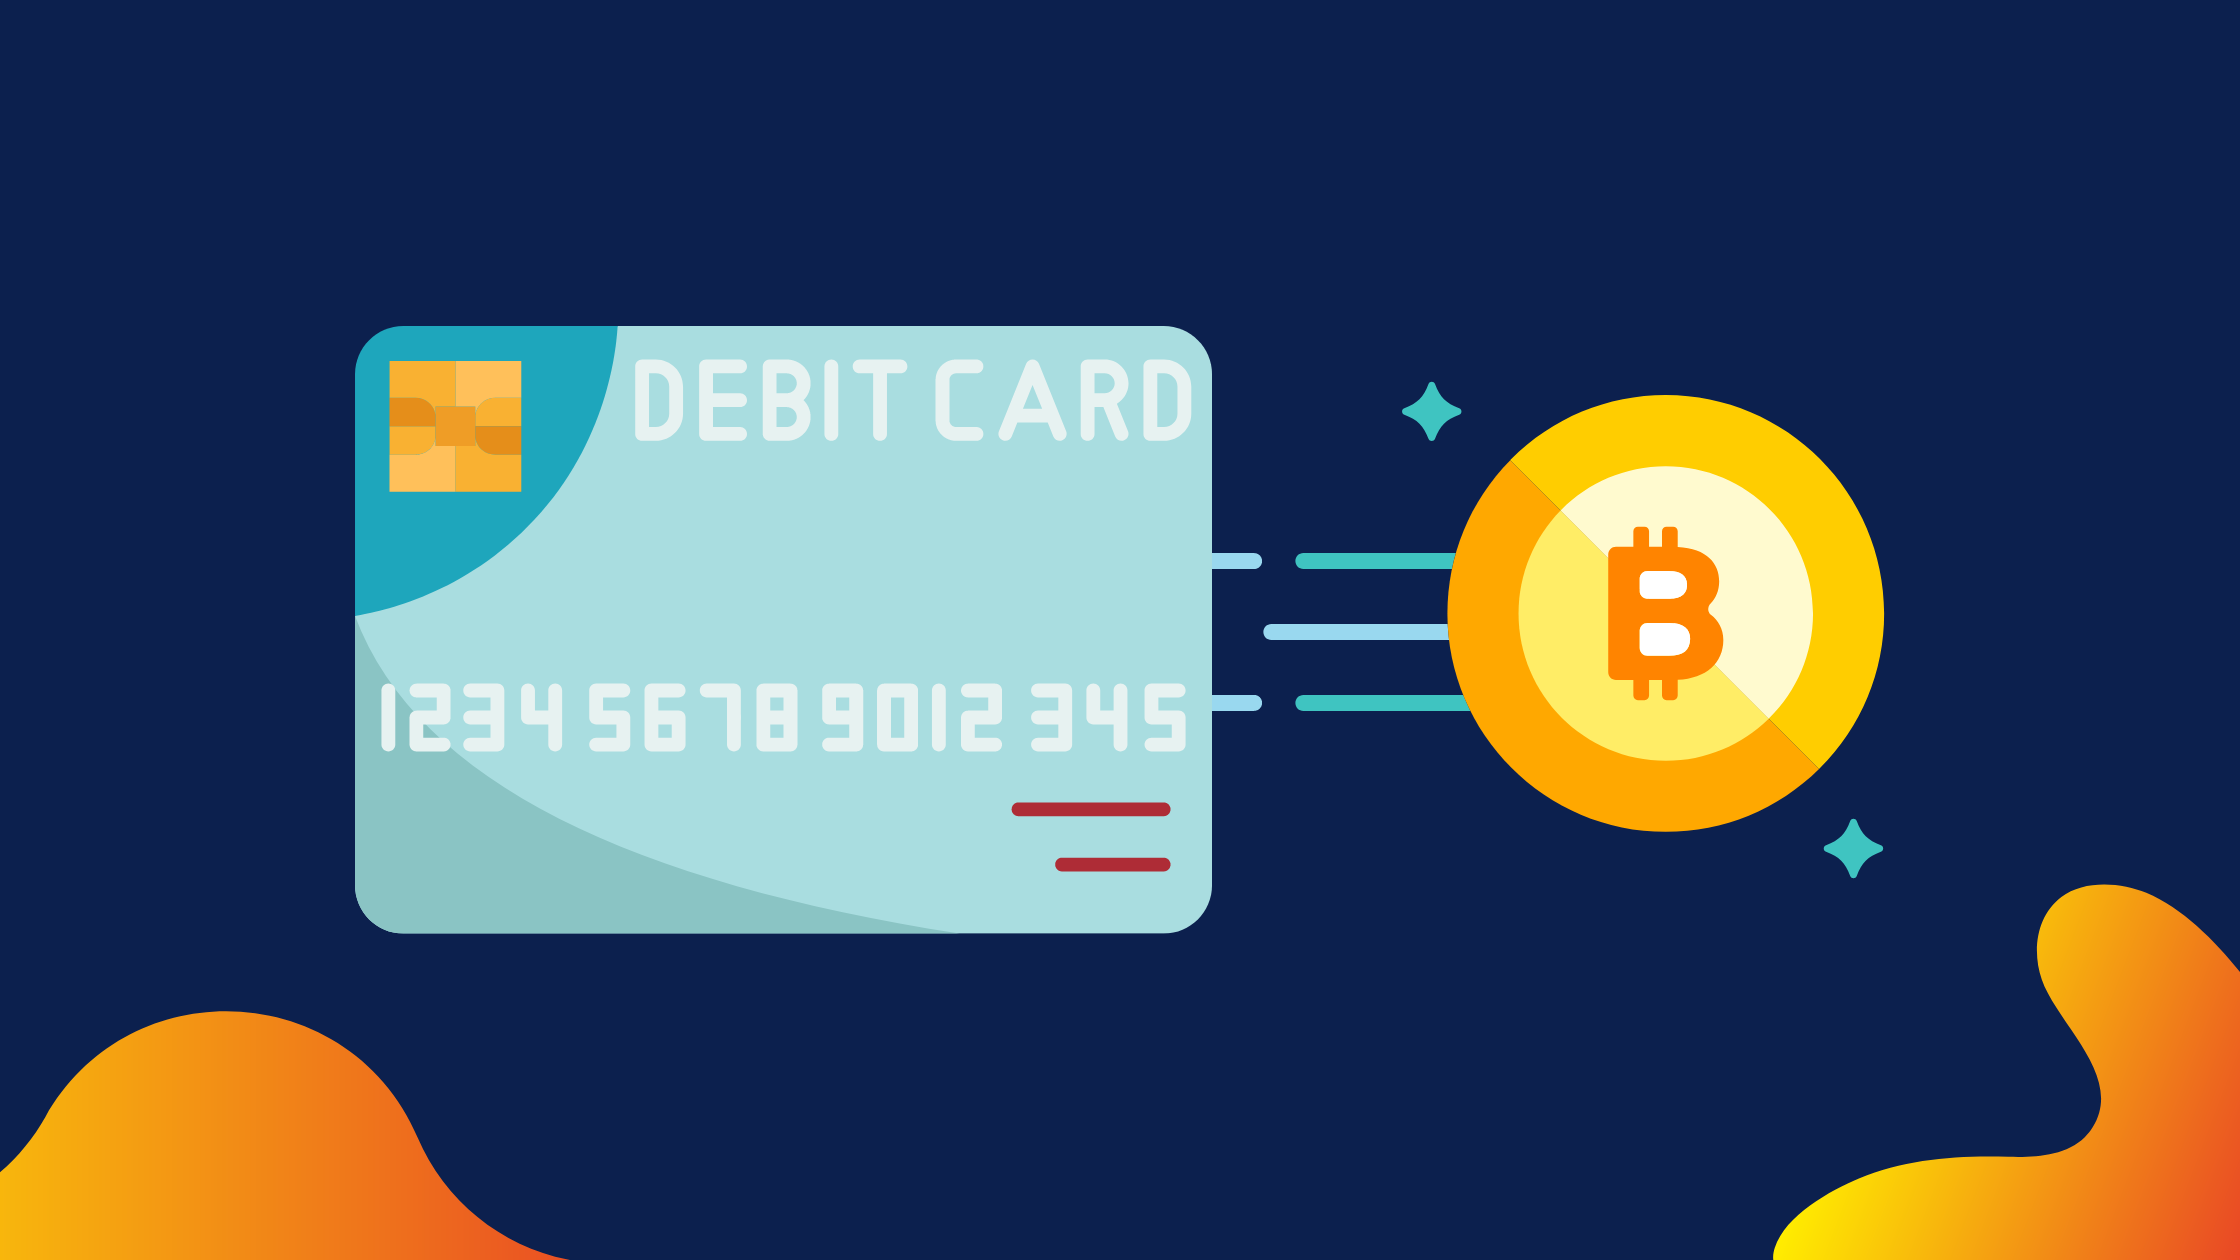 Buy Bitcoin With Visa gift card Online - How to Buy BTC Instantly in 